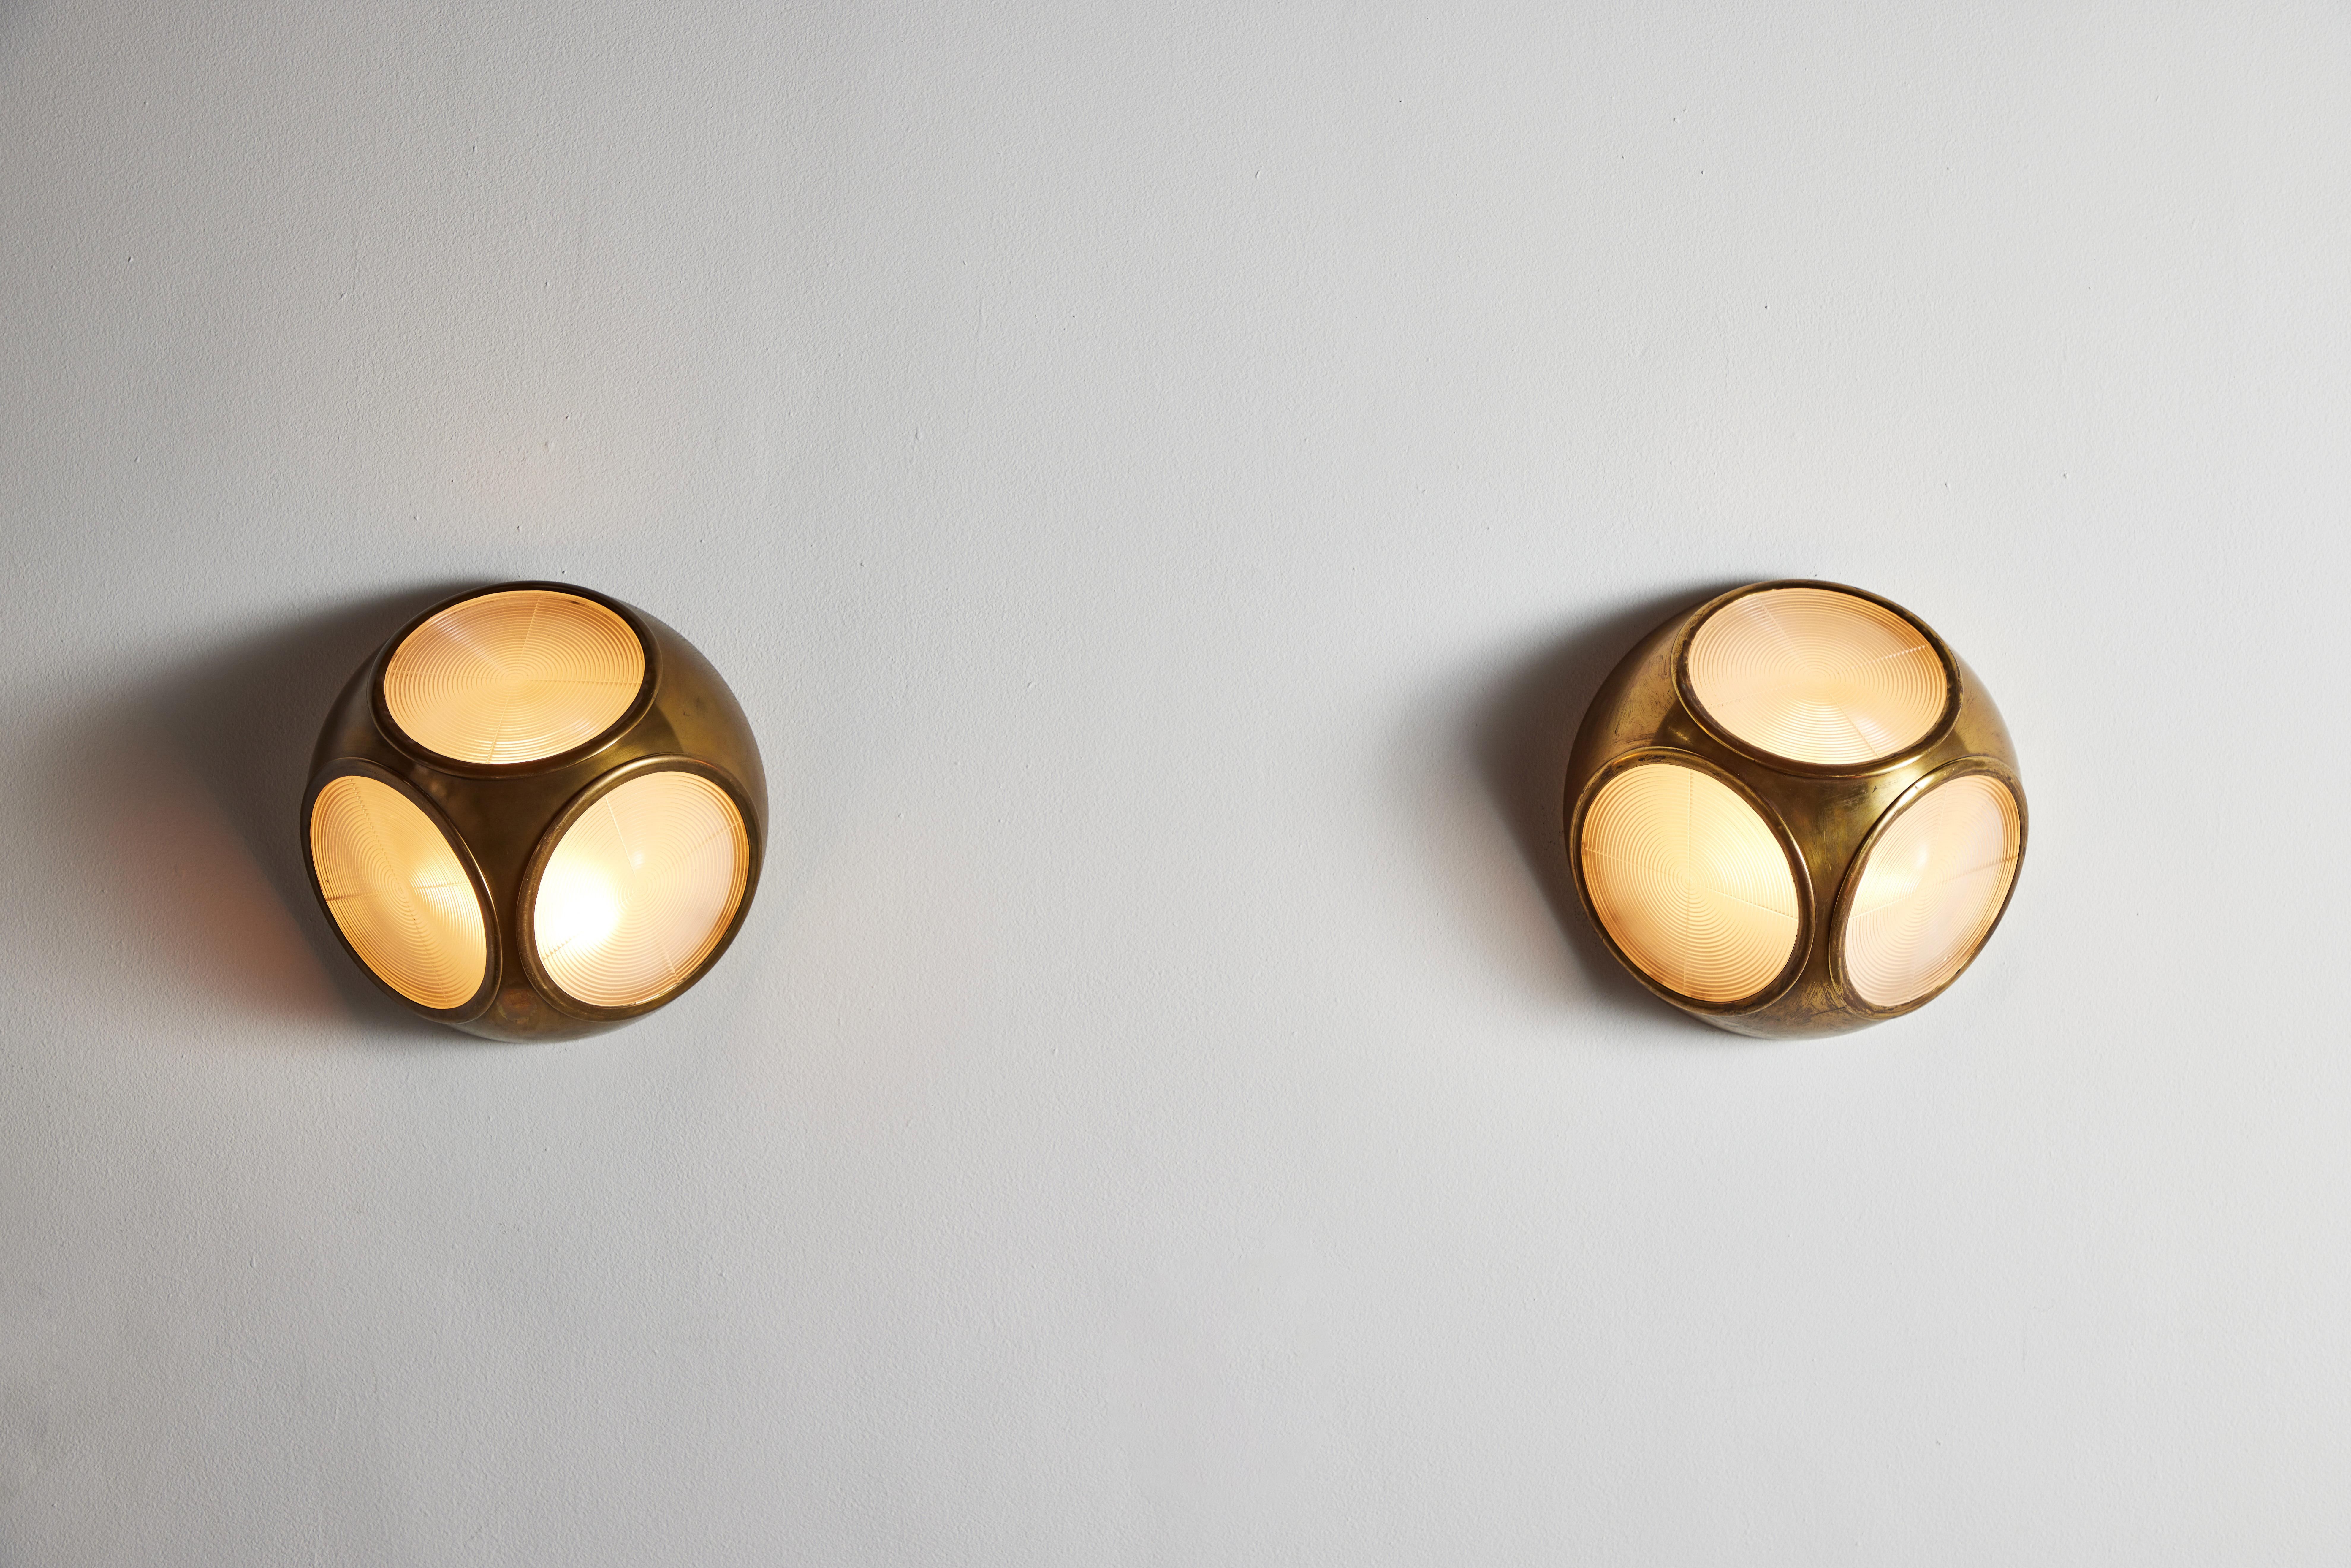 Rare pair of sconces by Atelier Jean Perzel. Designed and manufactured in France, circa 1930s. Faceted brass, glass. Rewired for U.S. standards. We recommend two E12 60w bulbs per fixture. Bulbs provided as a one time courtesy.